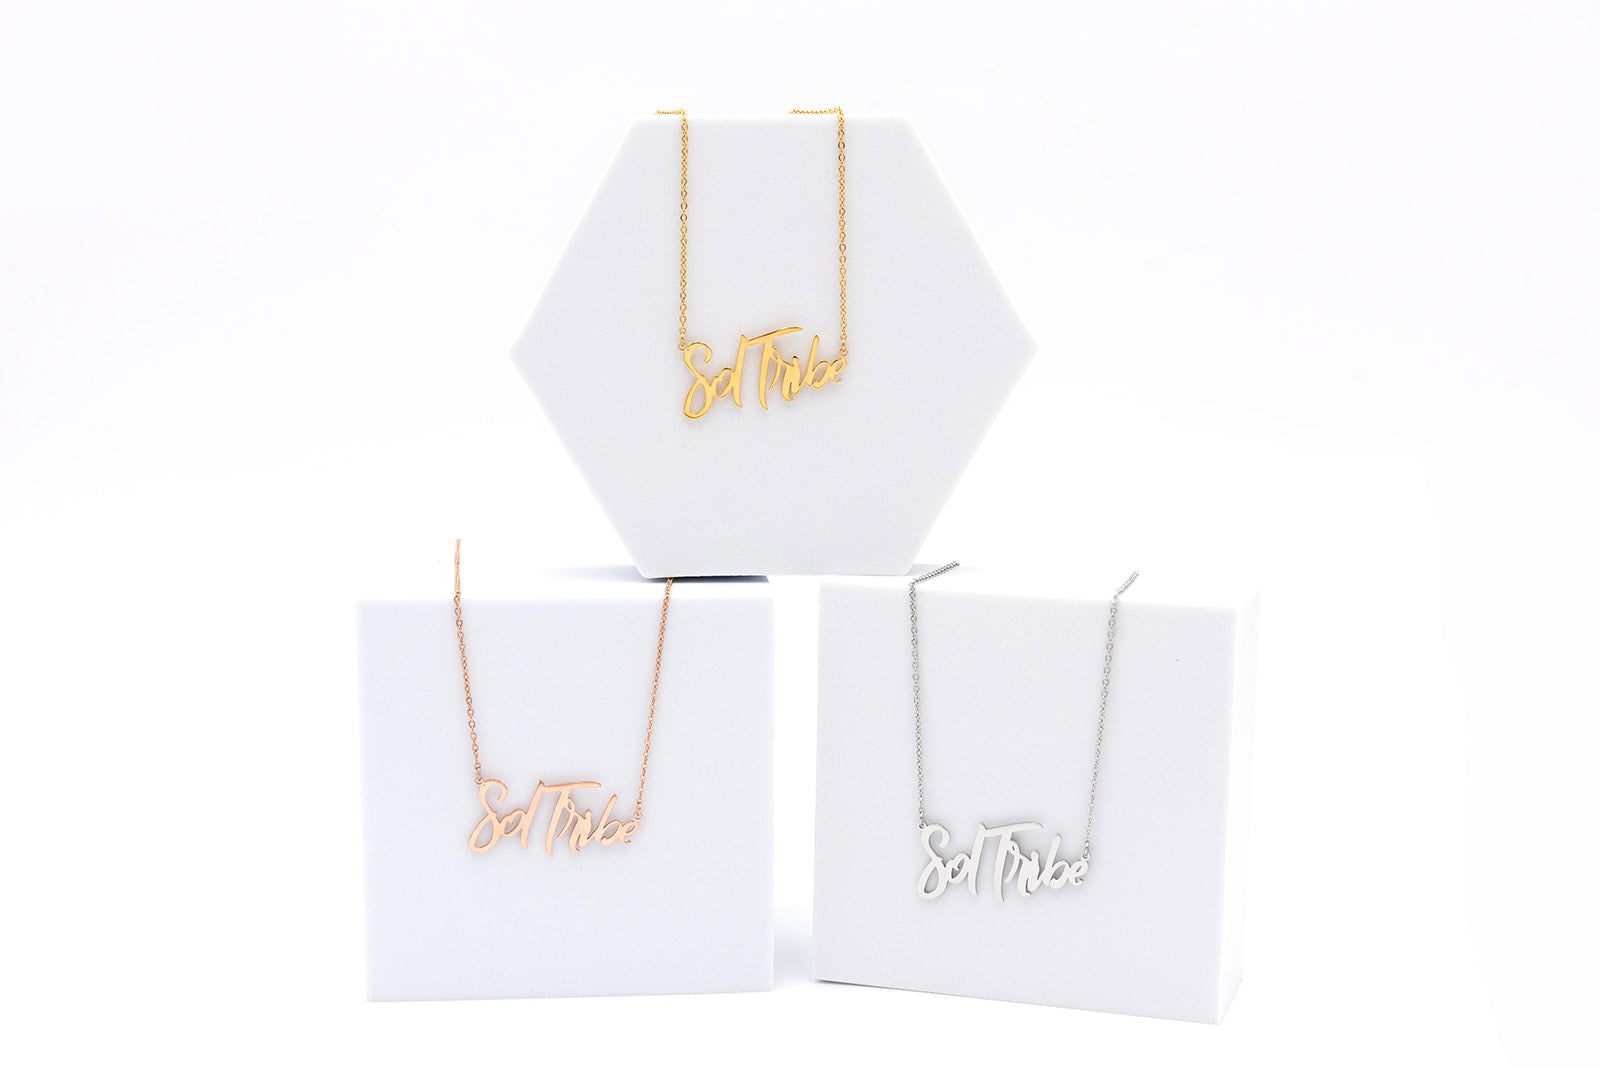 sol tribe affirmation necklaces from sol rise essentials hypoallergenic cute, positive jewelry